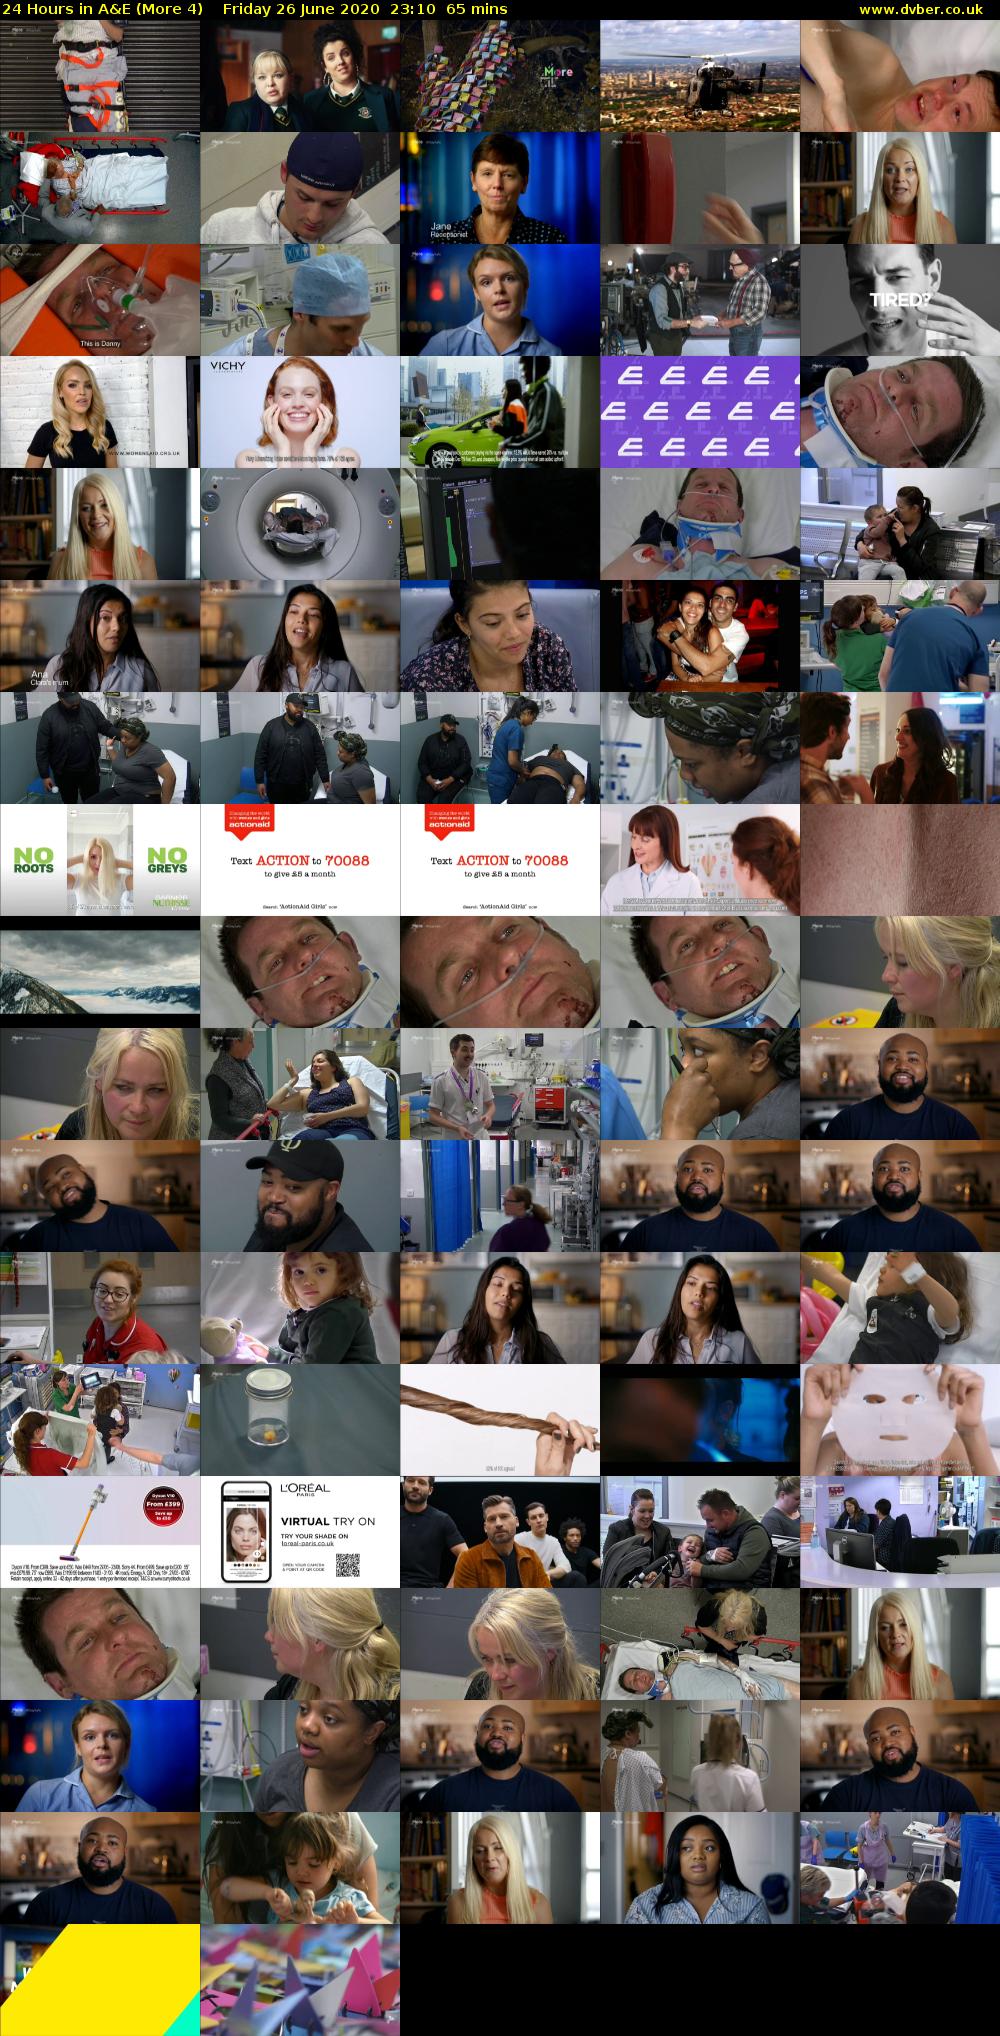 24 Hours in A&E (More 4) Friday 26 June 2020 23:10 - 00:15